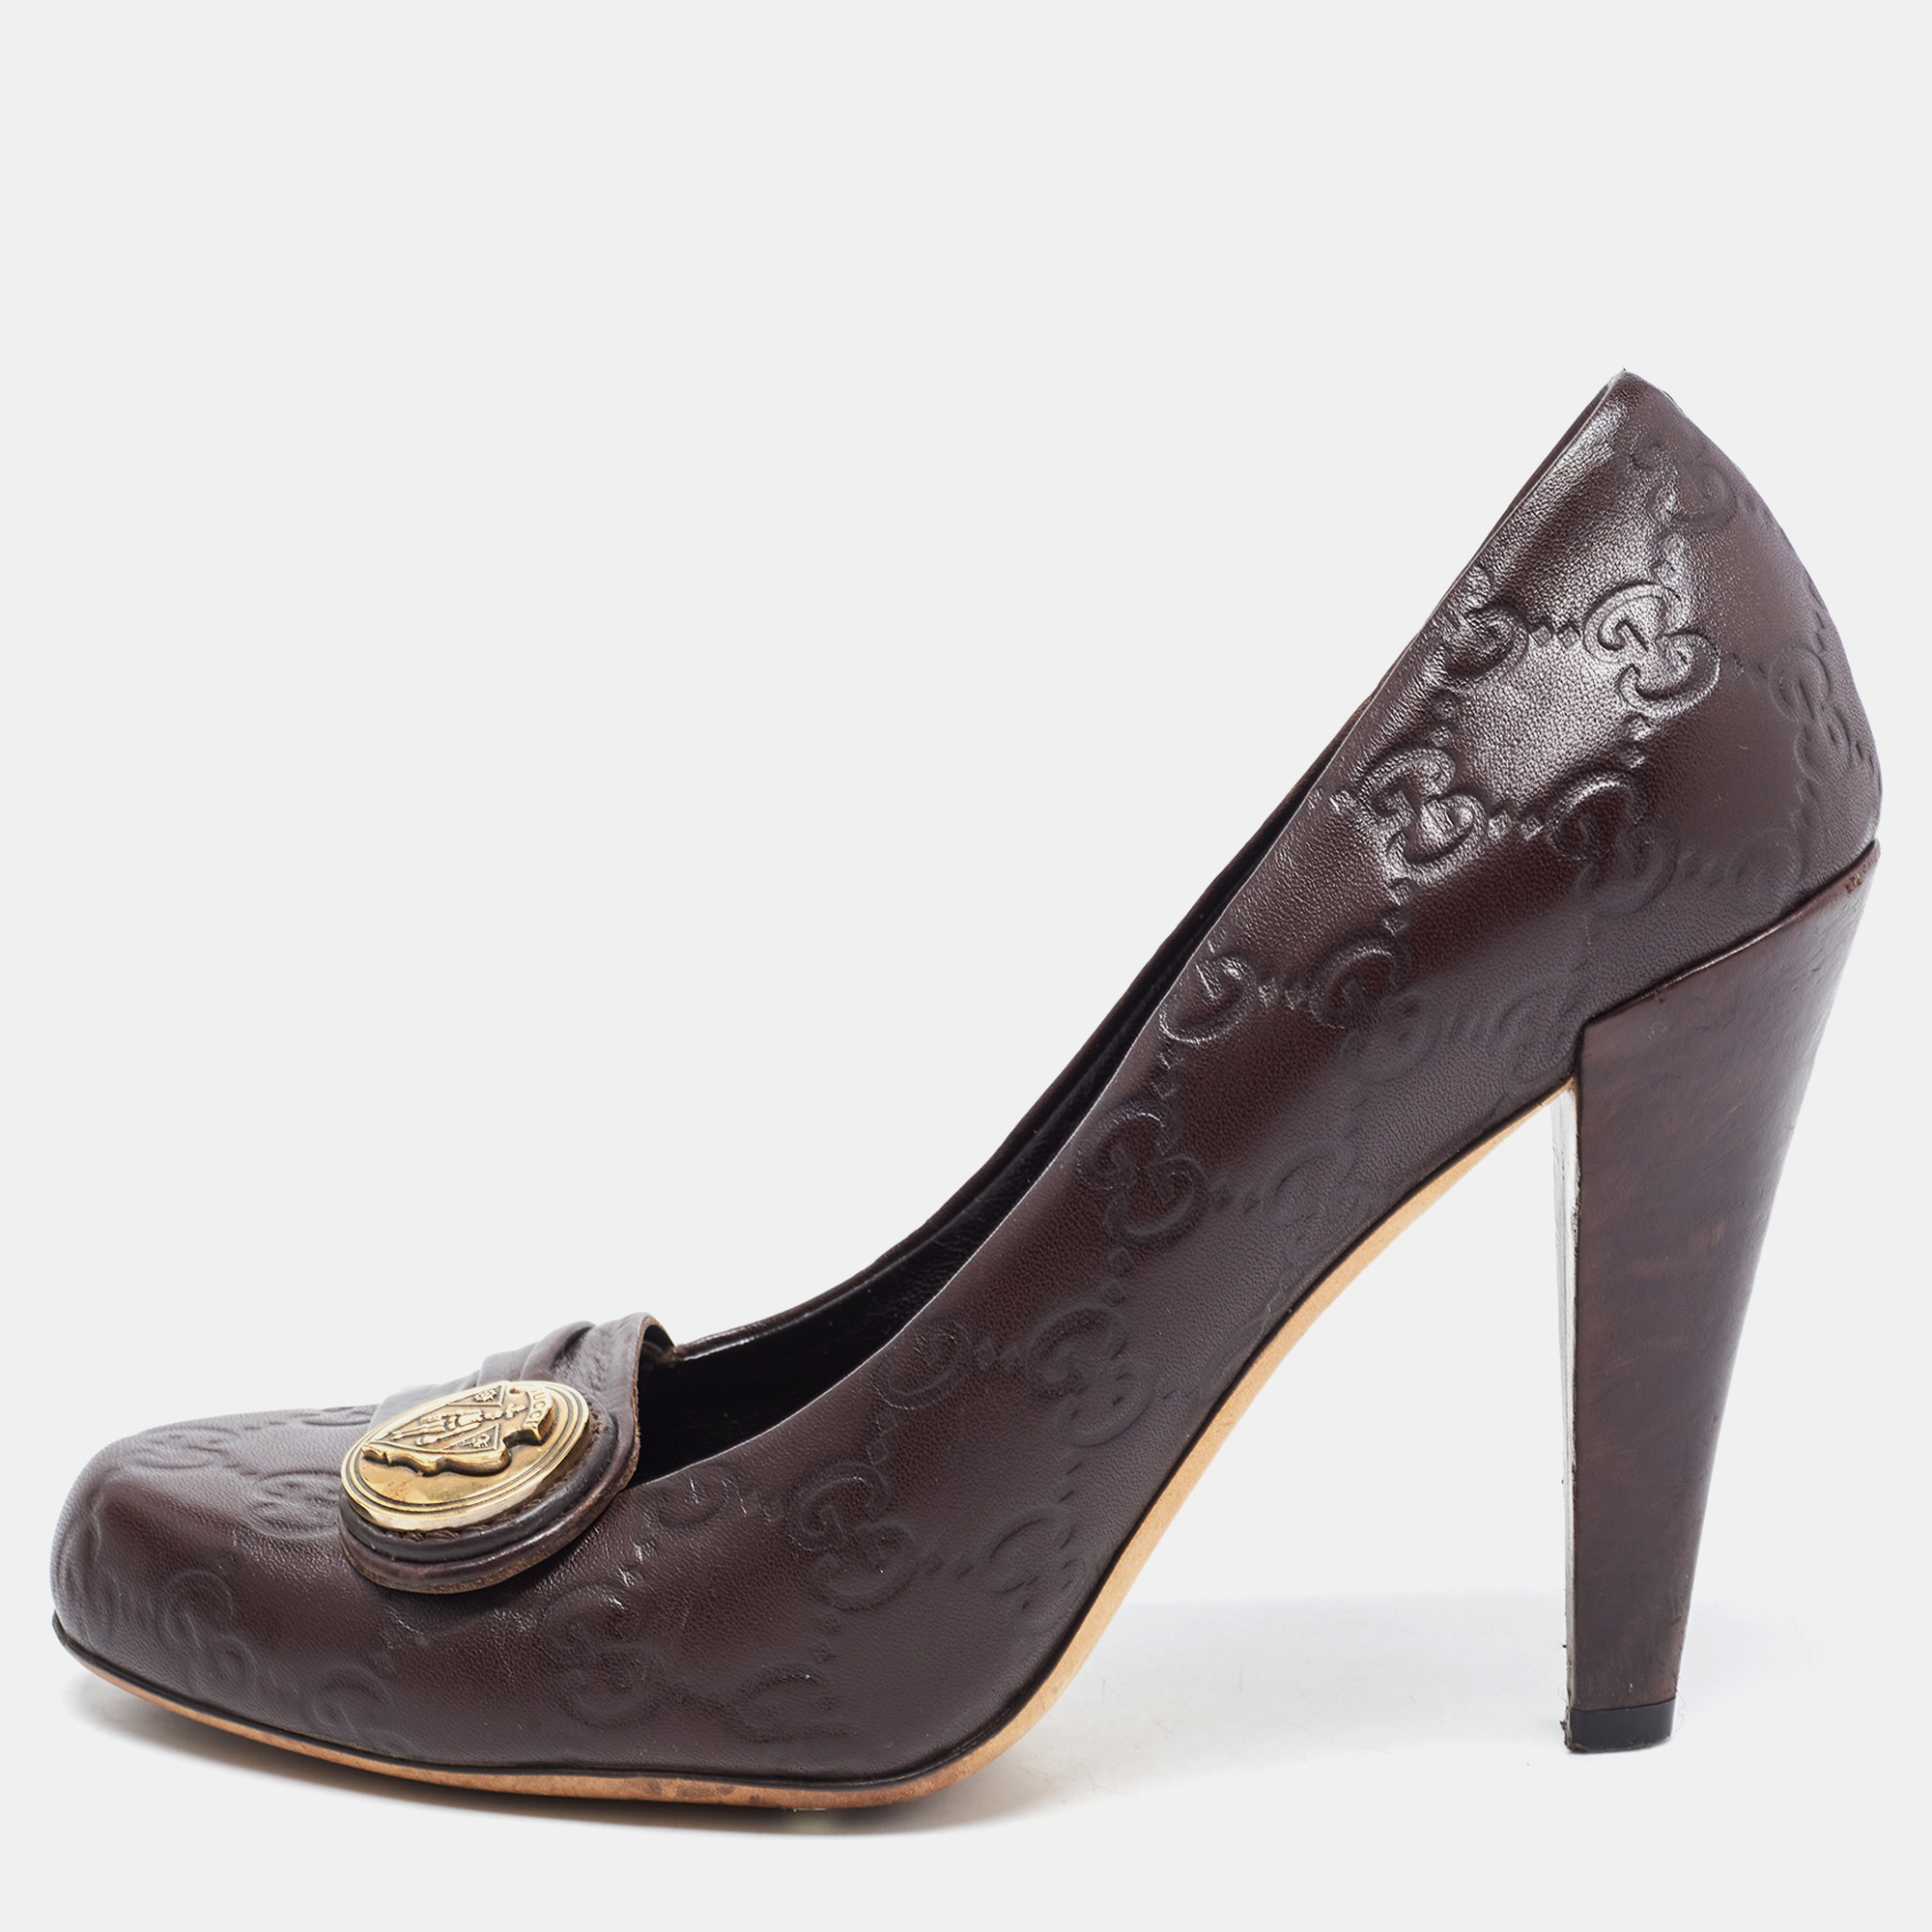 Gucci brown leather hysteria pumps size 38